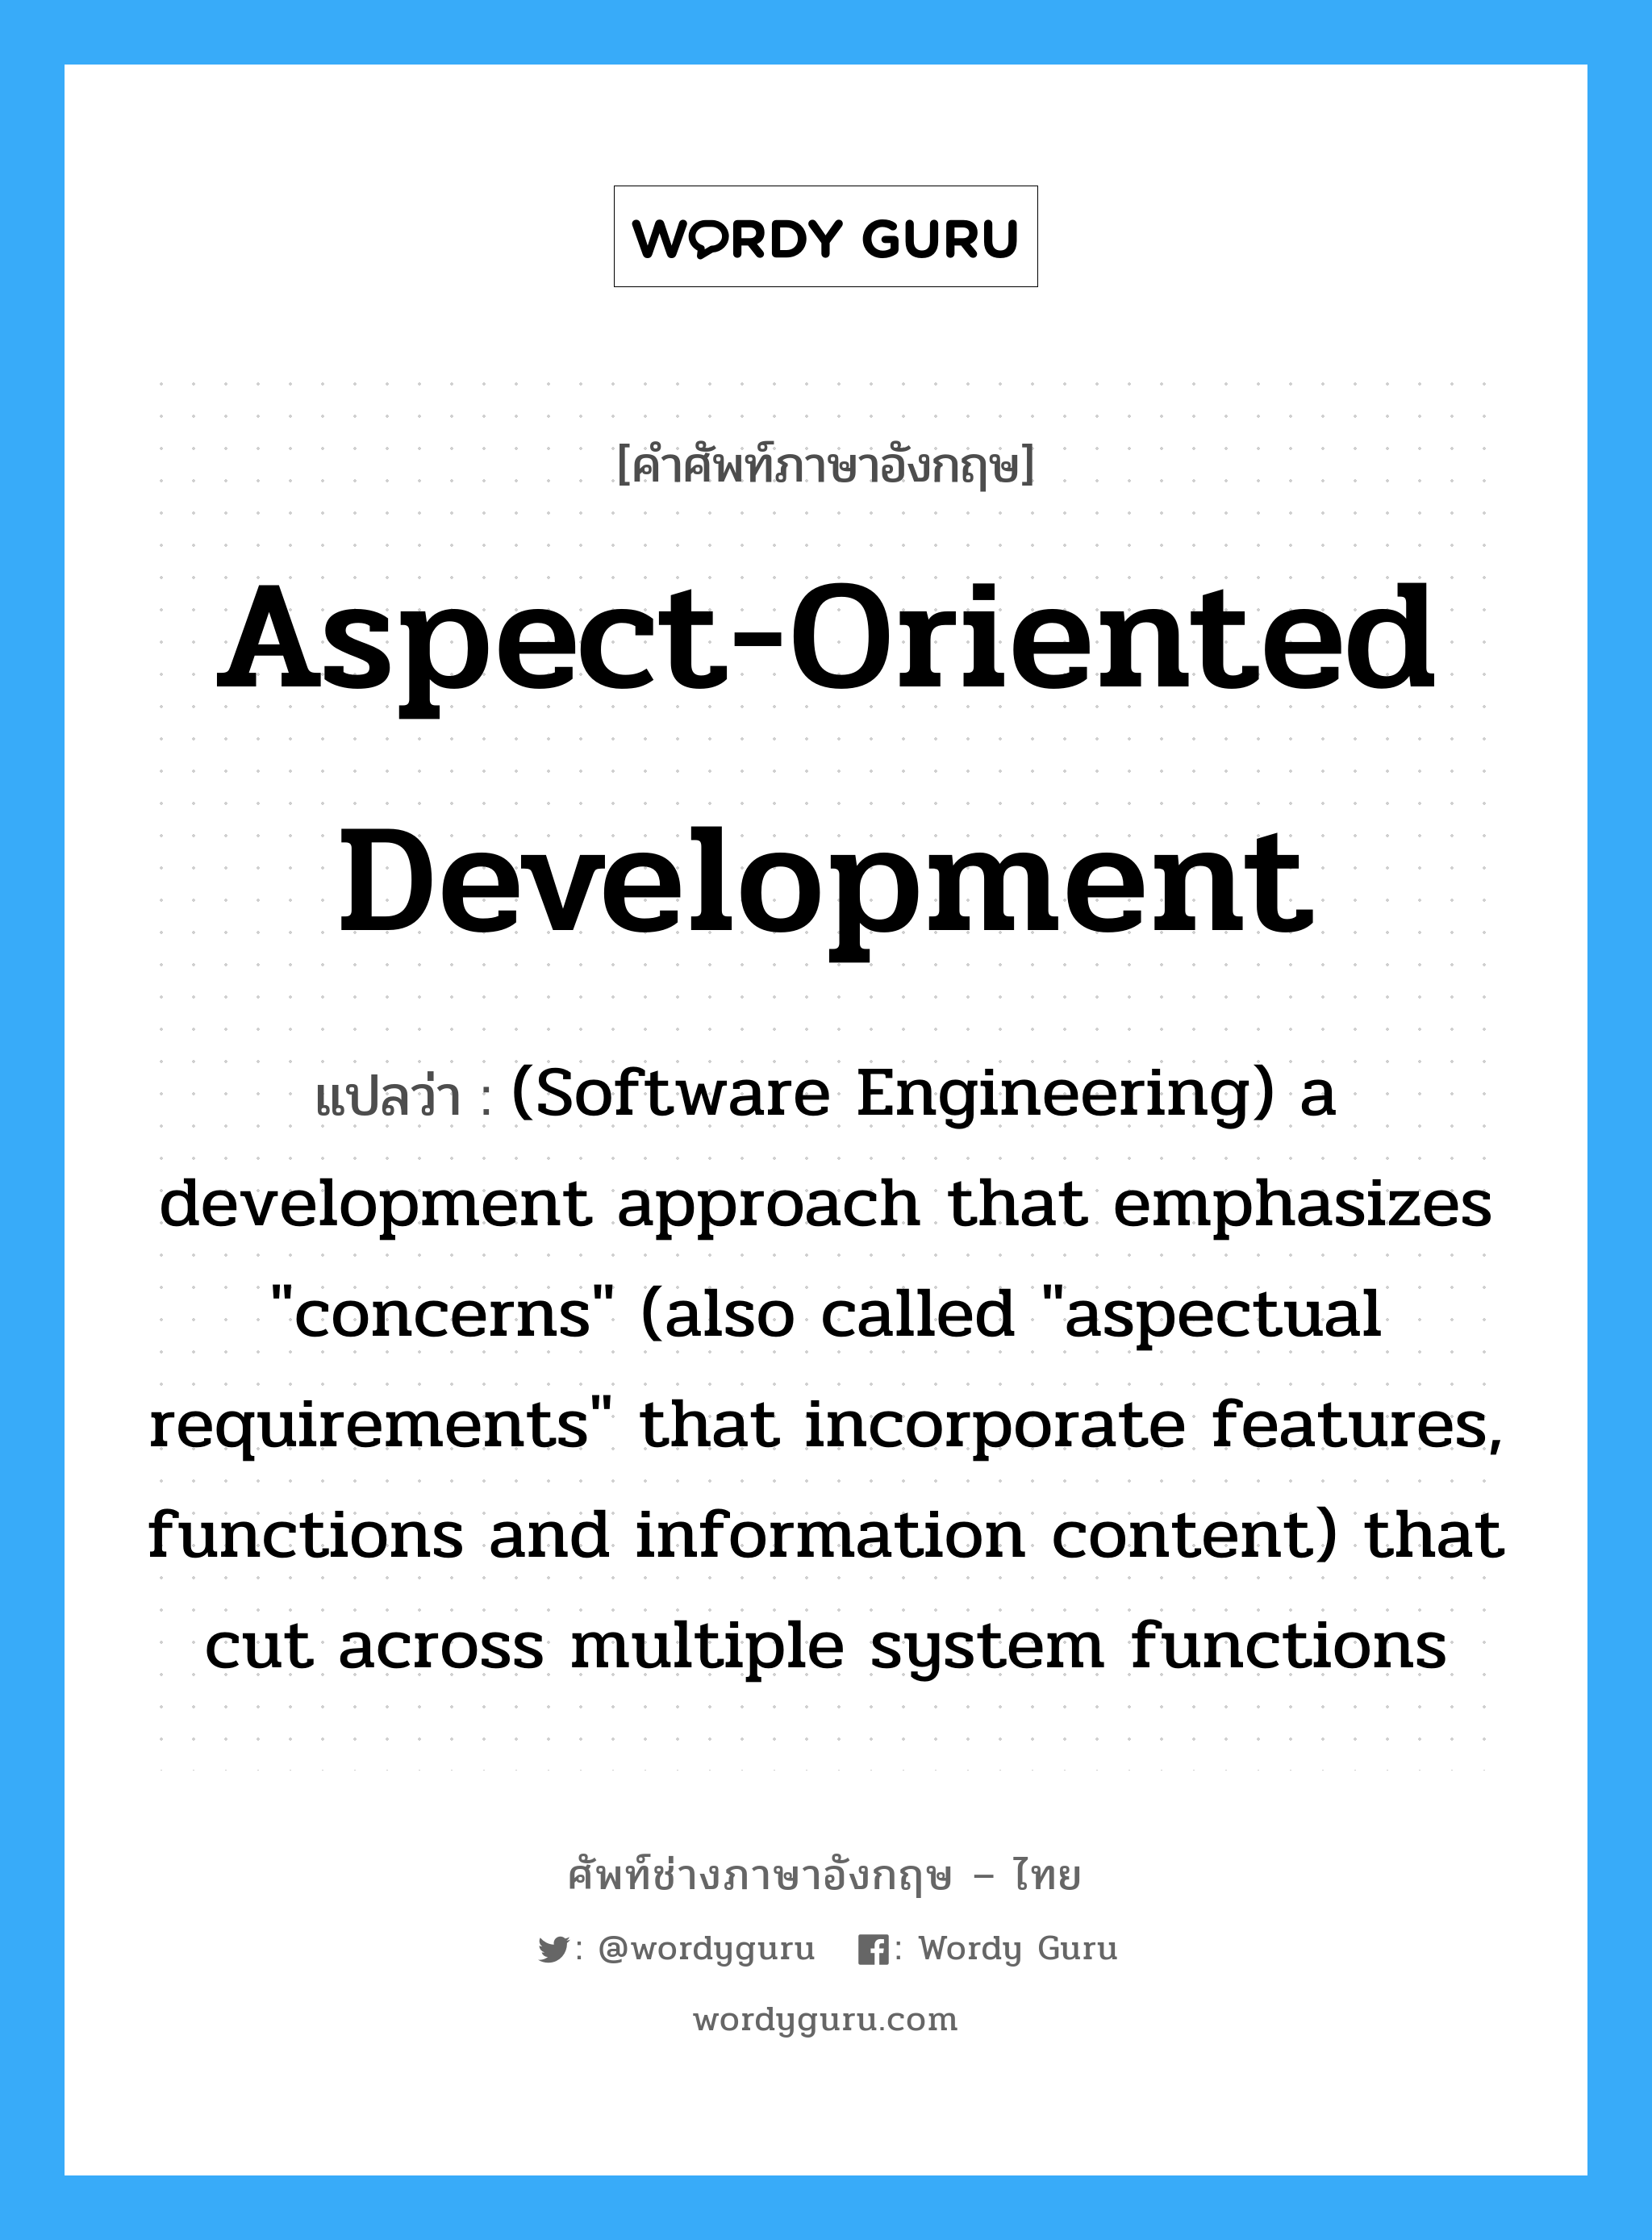 Aspect-oriented development แปลว่า?, คำศัพท์ช่างภาษาอังกฤษ - ไทย Aspect-oriented development คำศัพท์ภาษาอังกฤษ Aspect-oriented development แปลว่า (Software Engineering) a development approach that emphasizes "concerns" (also called "aspectual requirements" that incorporate features, functions and information content) that cut across multiple system functions